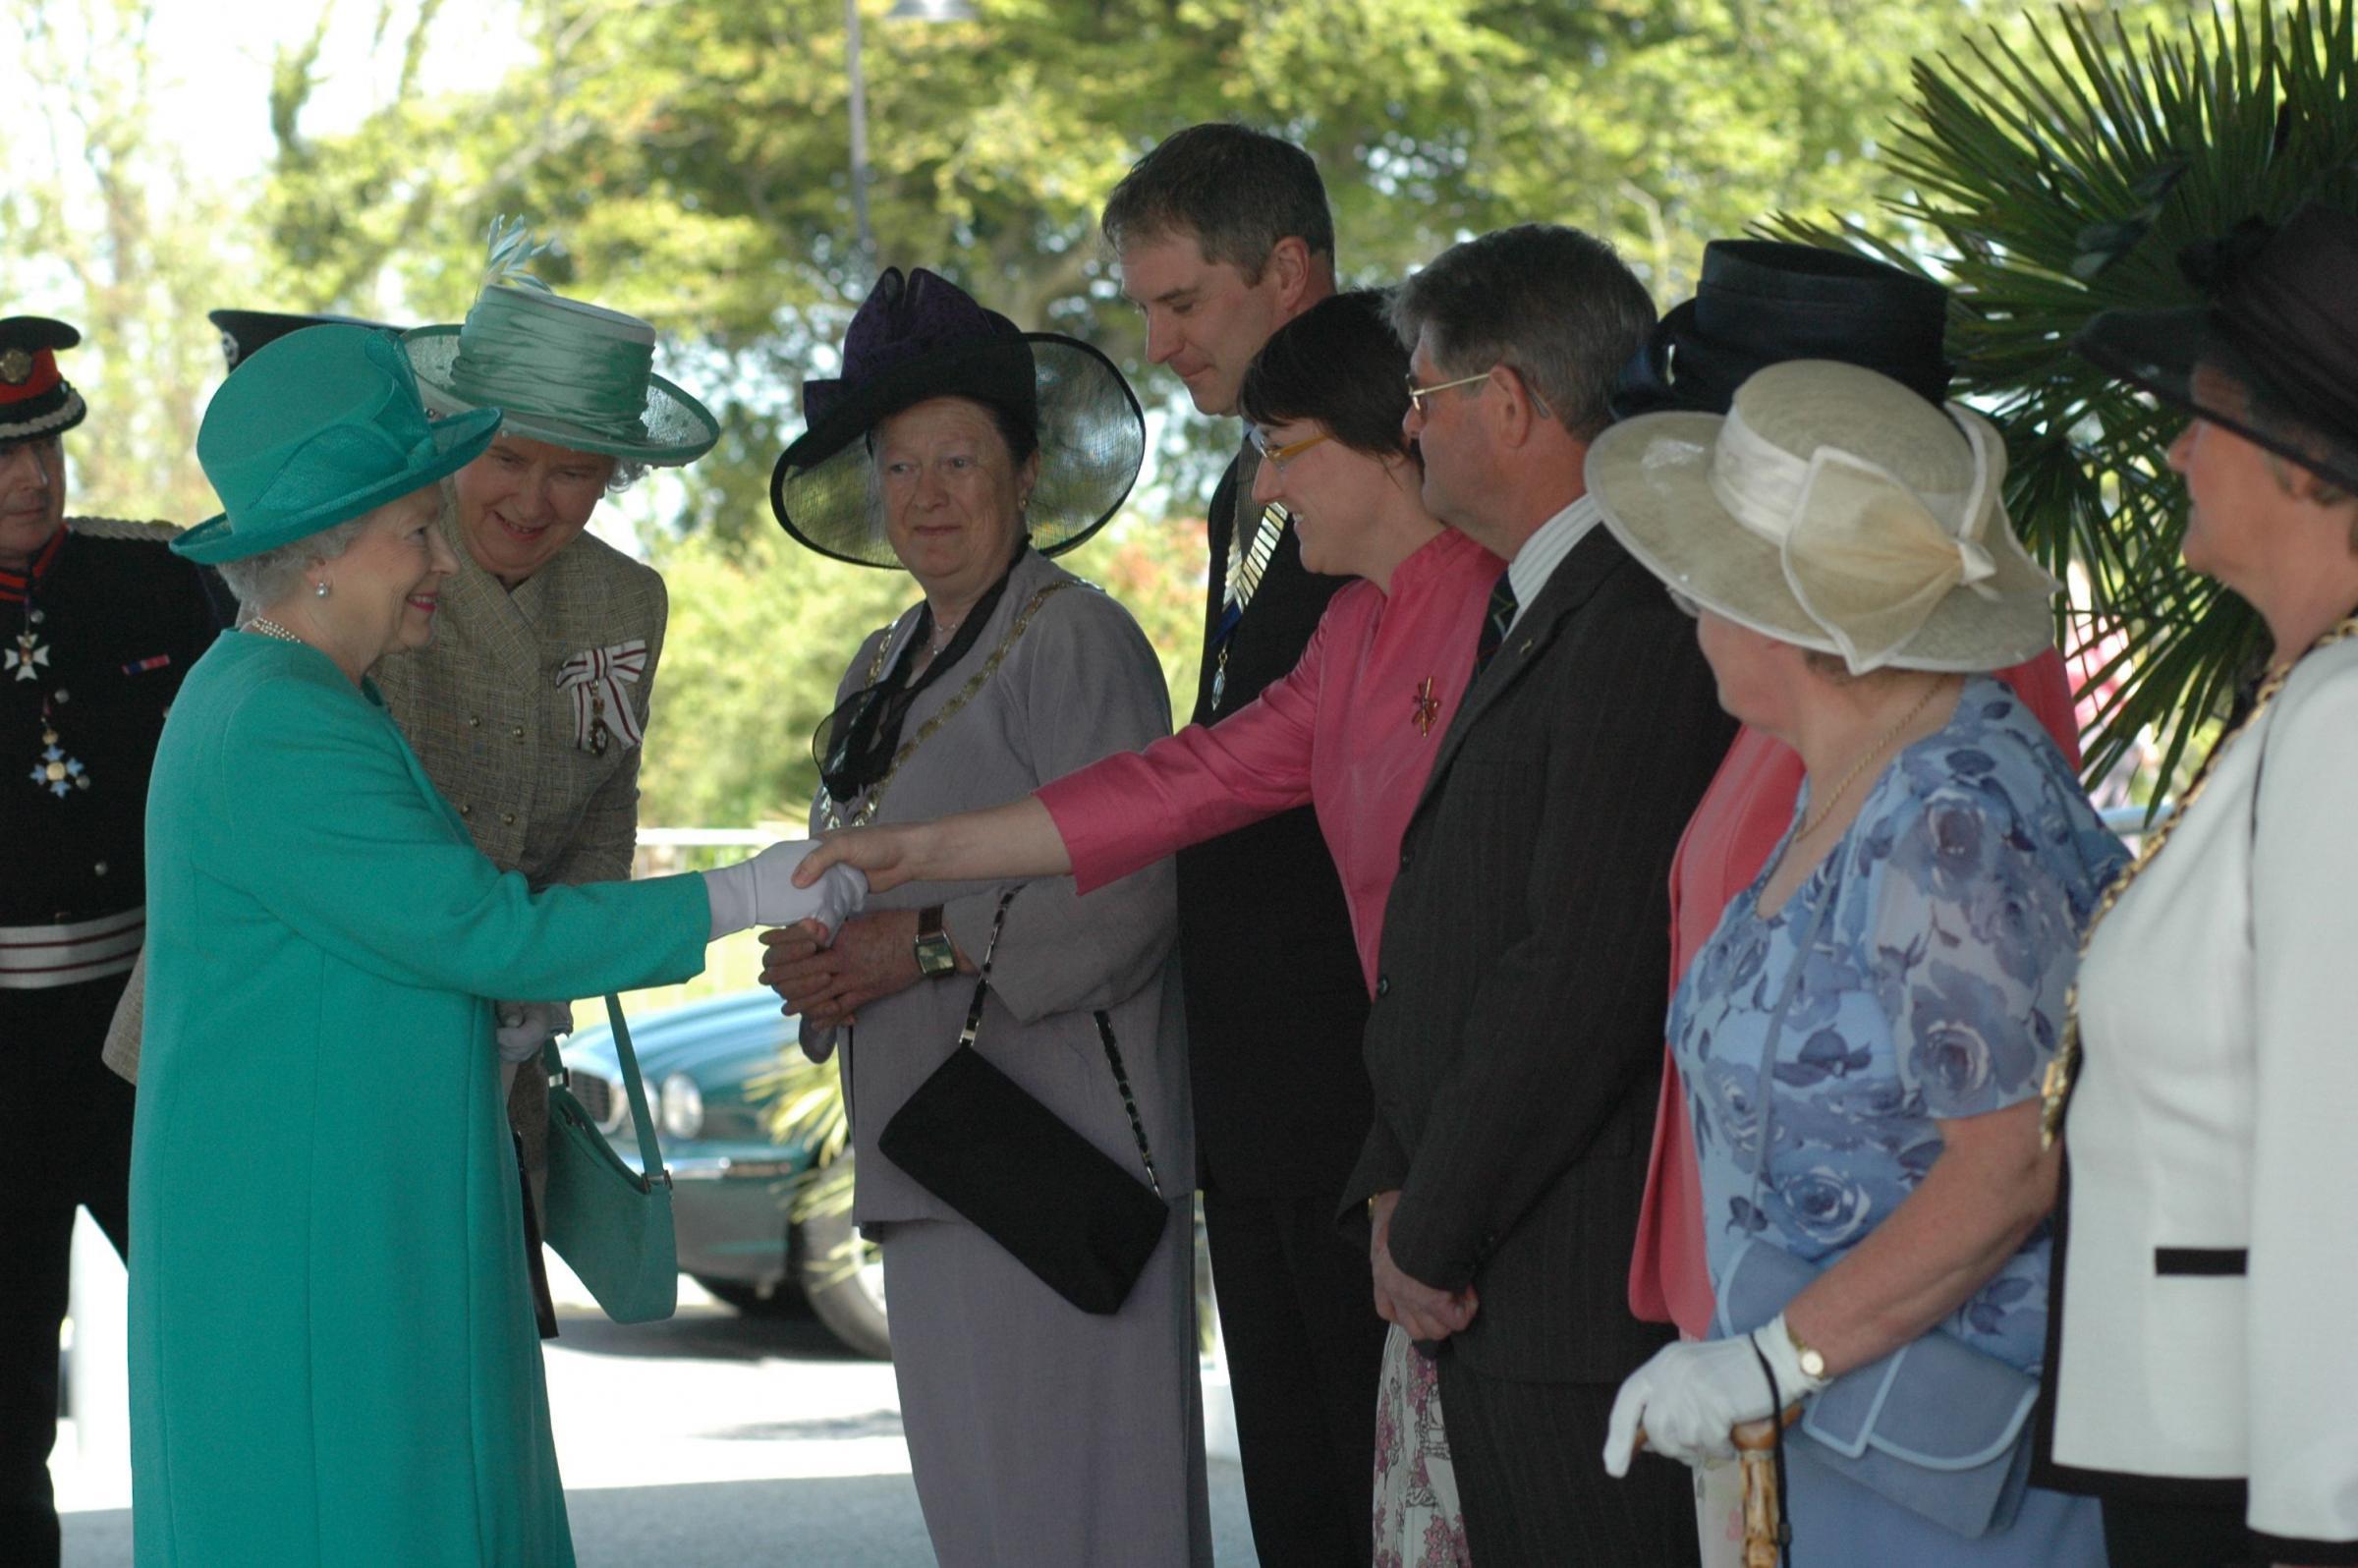 The Queen meets MP at the time Julia Goldsworthy